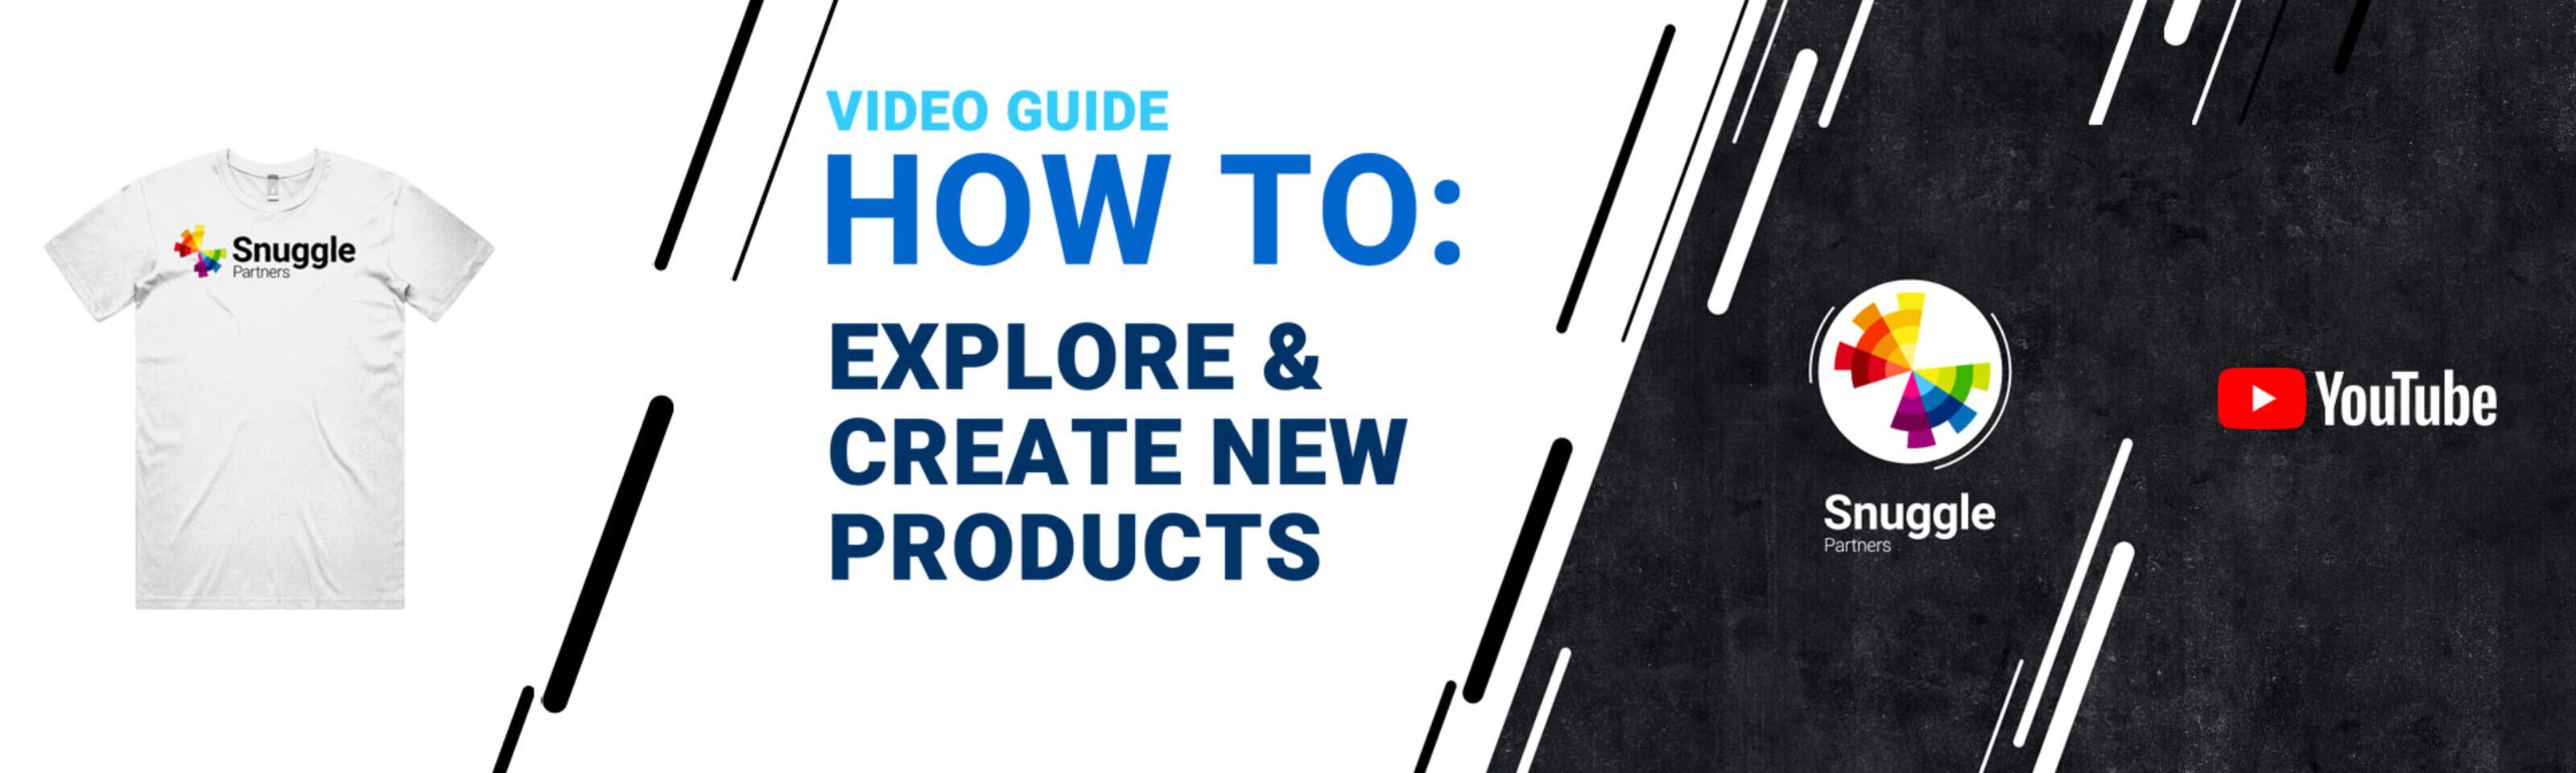 HOW TO: Explore & Create New Products